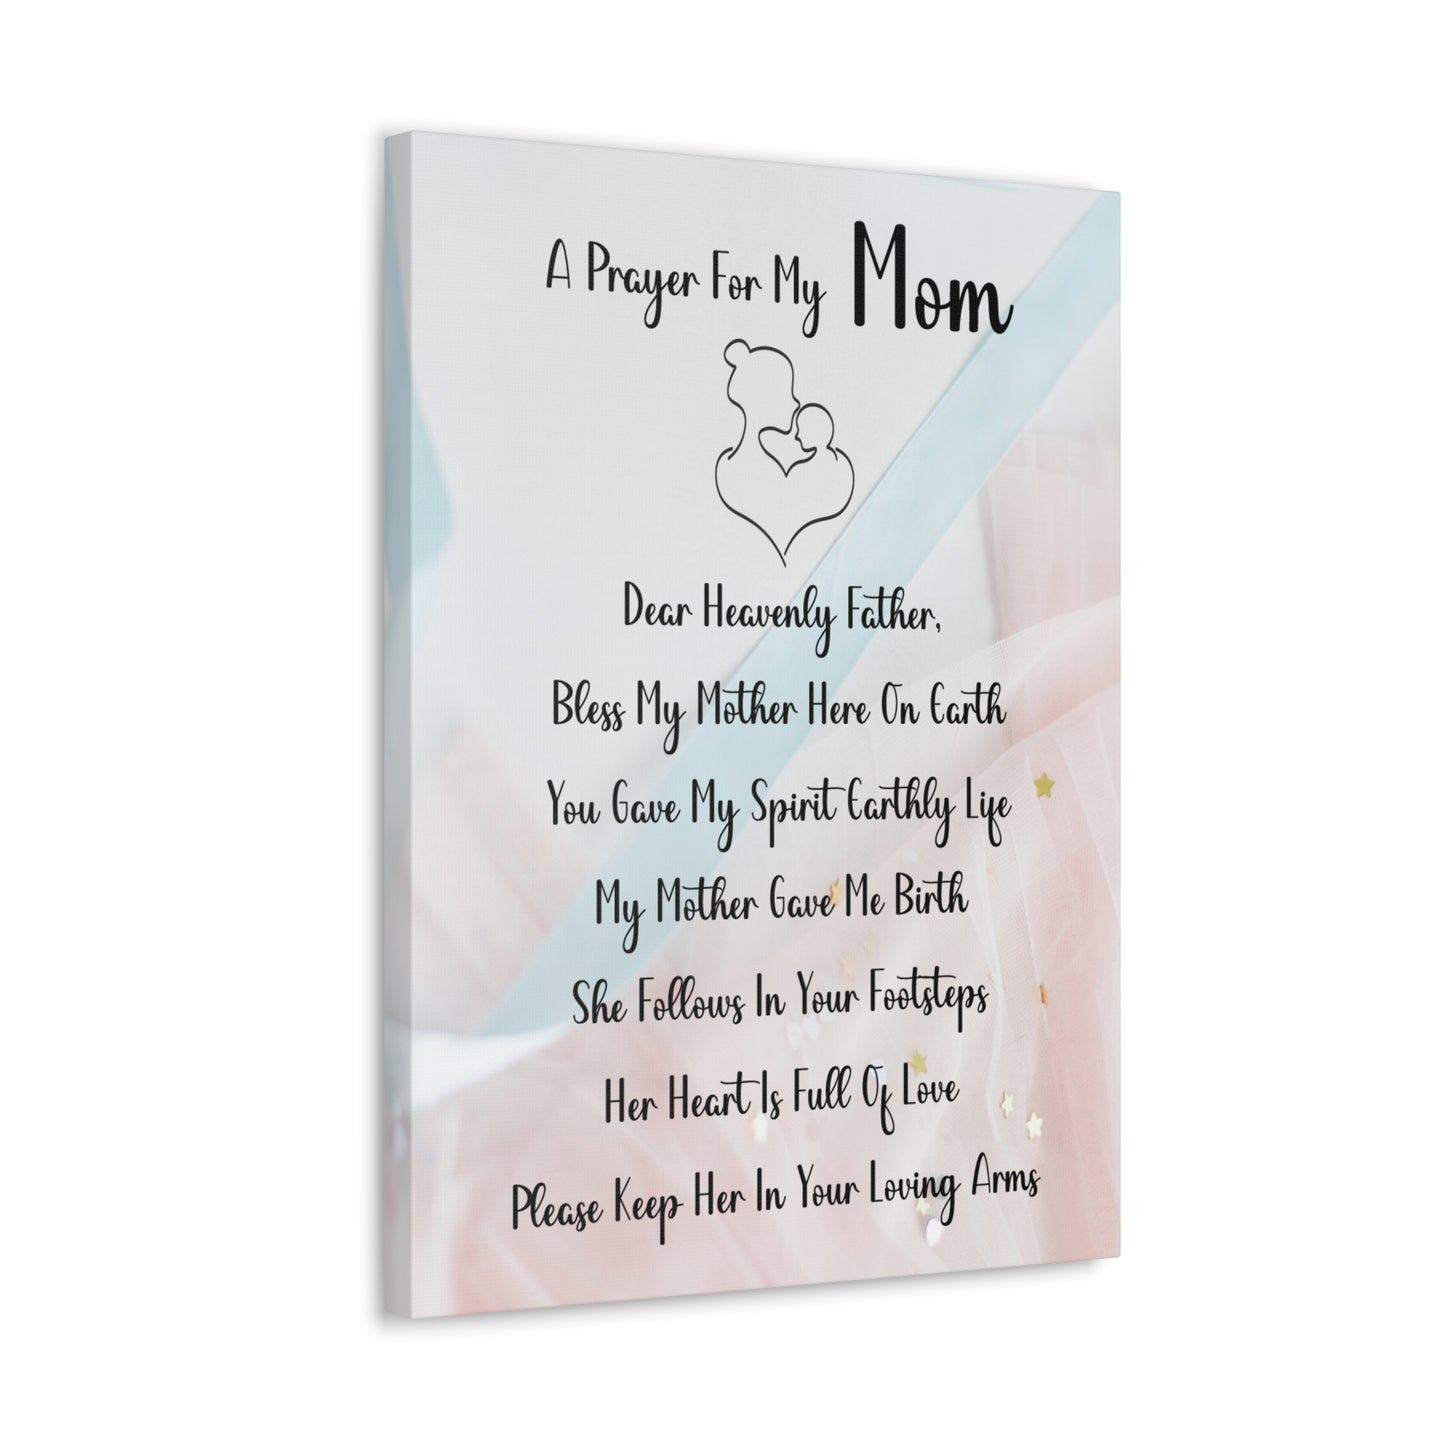 "Prayer For My Mom" Wall Art - Weave Got Gifts - Unique Gifts You Won’t Find Anywhere Else!